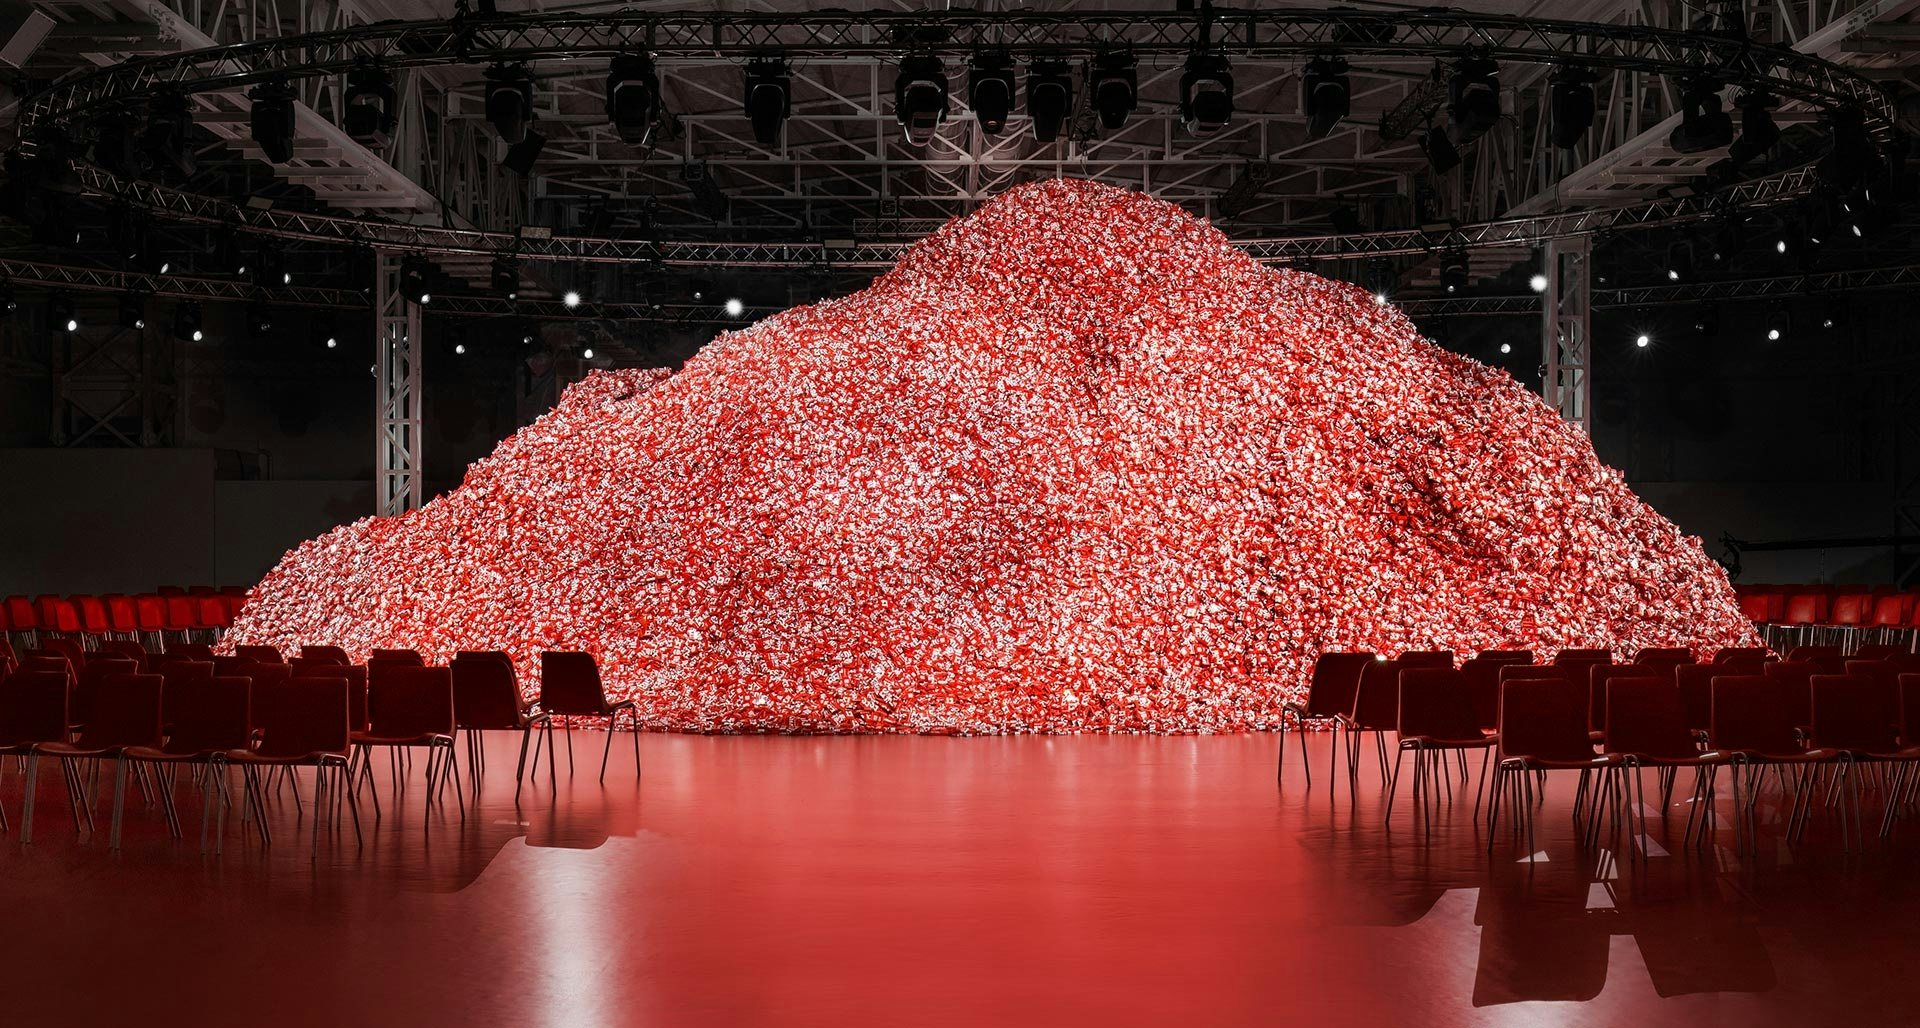 Diesel and Durex came together to create the world's largest heap of condoms. The backdrop of Diesel's Fall 2023 runway. Photo: Diesel